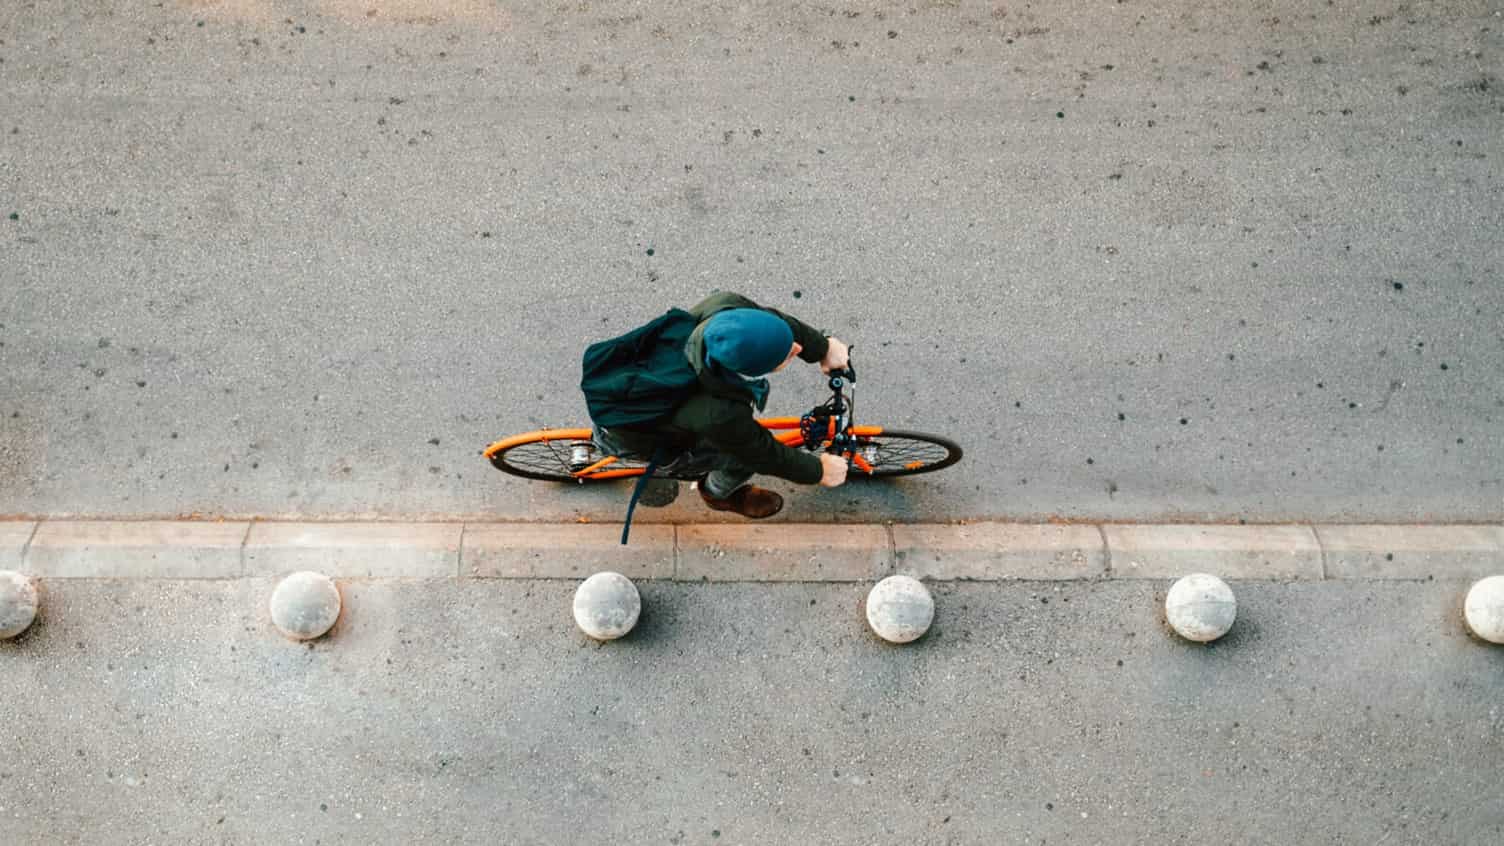 Overhead image of a person riding a bike